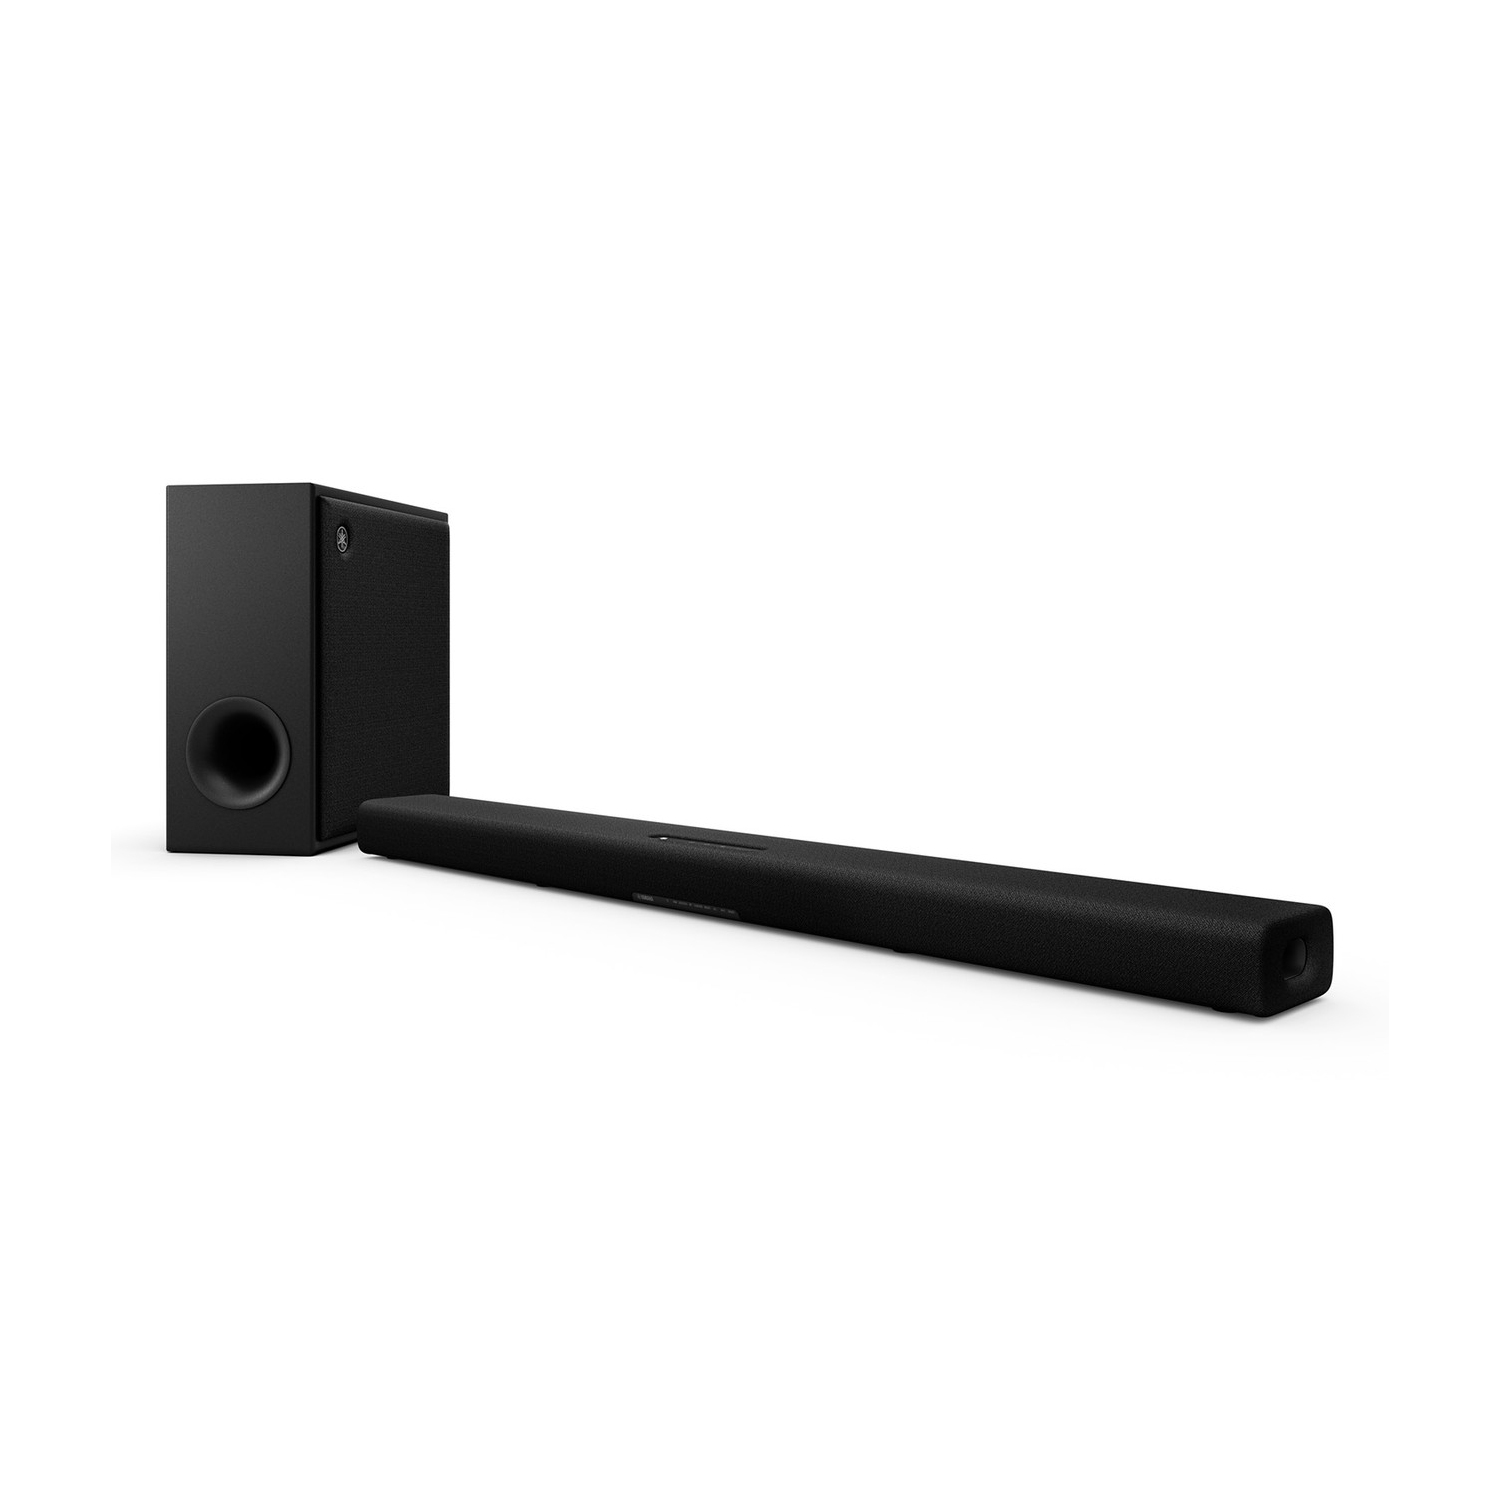 Yamaha - SR-X50ABL DOLBY ATMOS® enabled Sound Bar with wireless subwoofer- Black